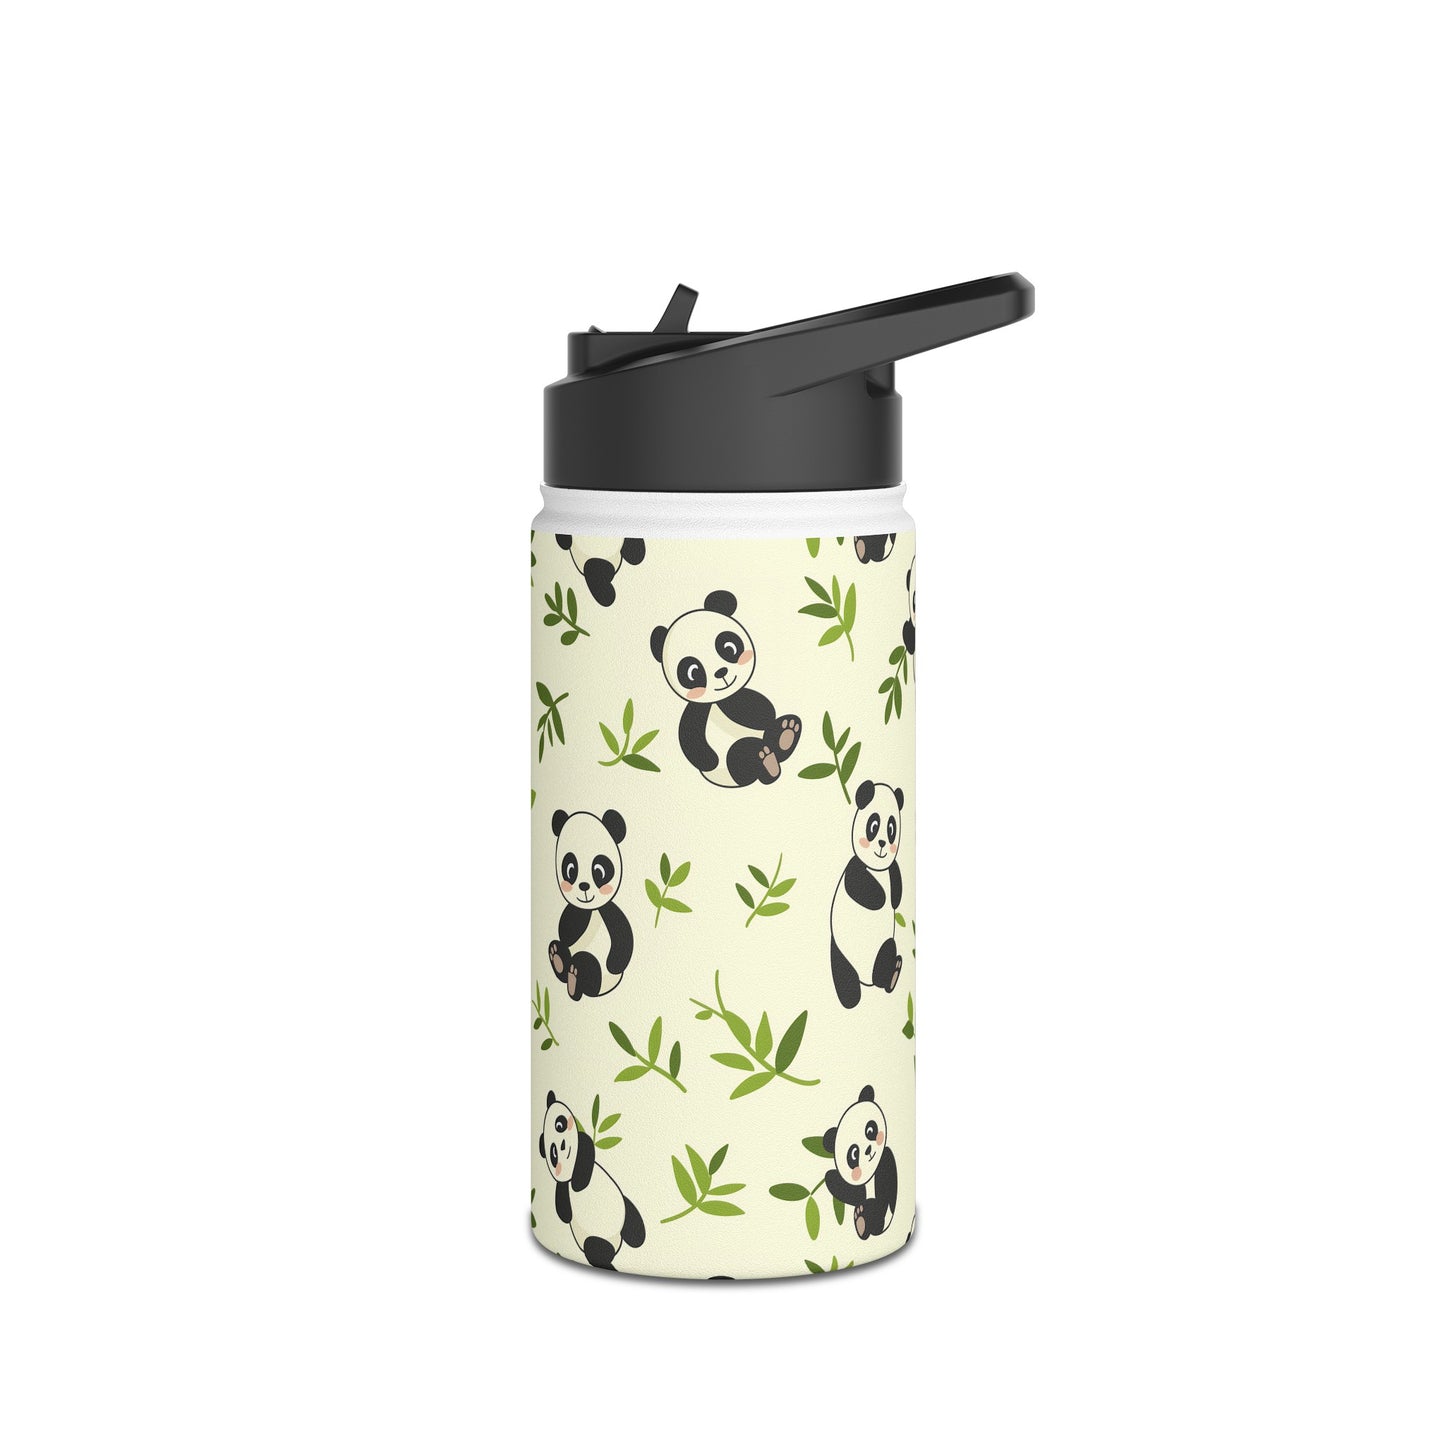 Insulated Water Bottle, 12oz, Cute Panda Bear Cubs - Double Walled Stainless Steel Thermos, Keeps Drinks Hot or Cold